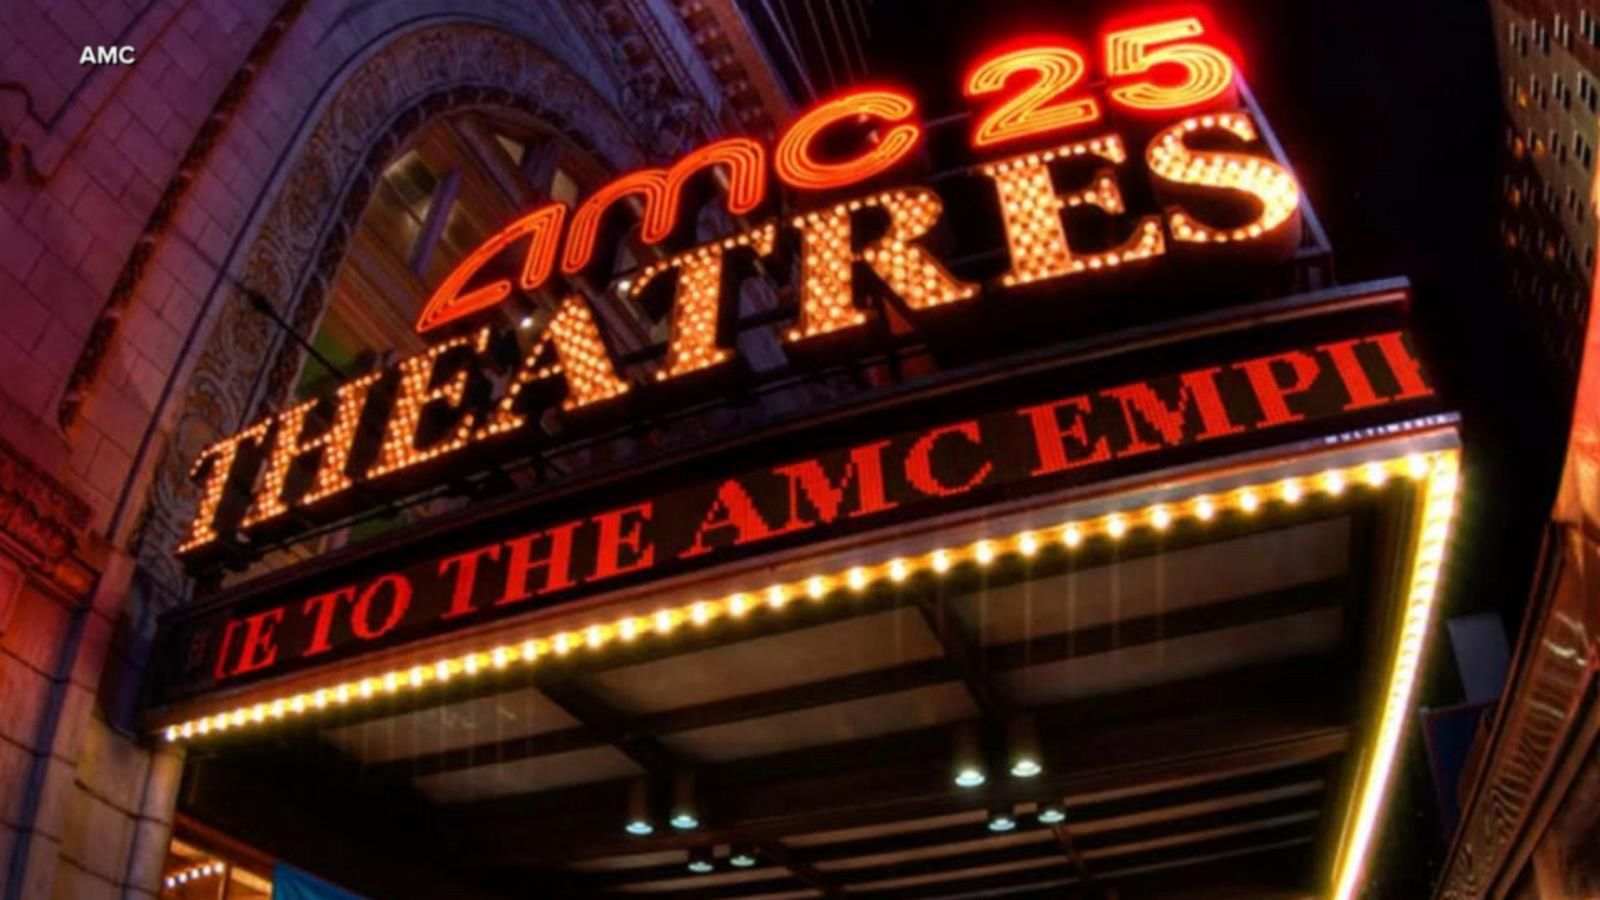 AMC Theaters threatens Universal Studios over on-demand releases